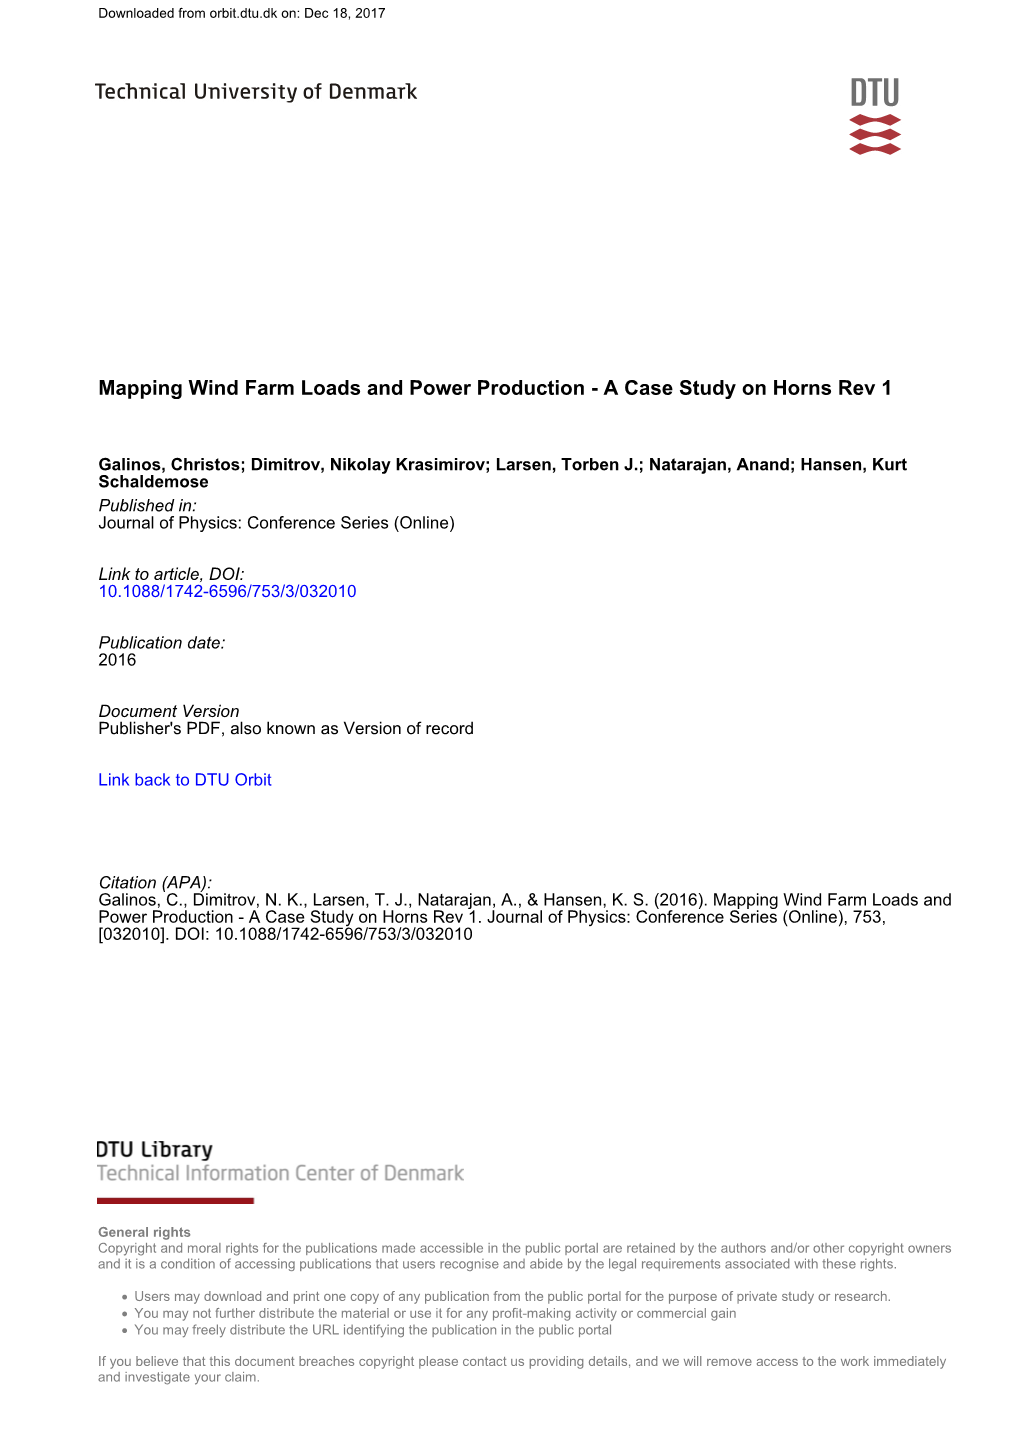 Mapping Wind Farm Loads and Power Production - a Case Study on Horns Rev 1